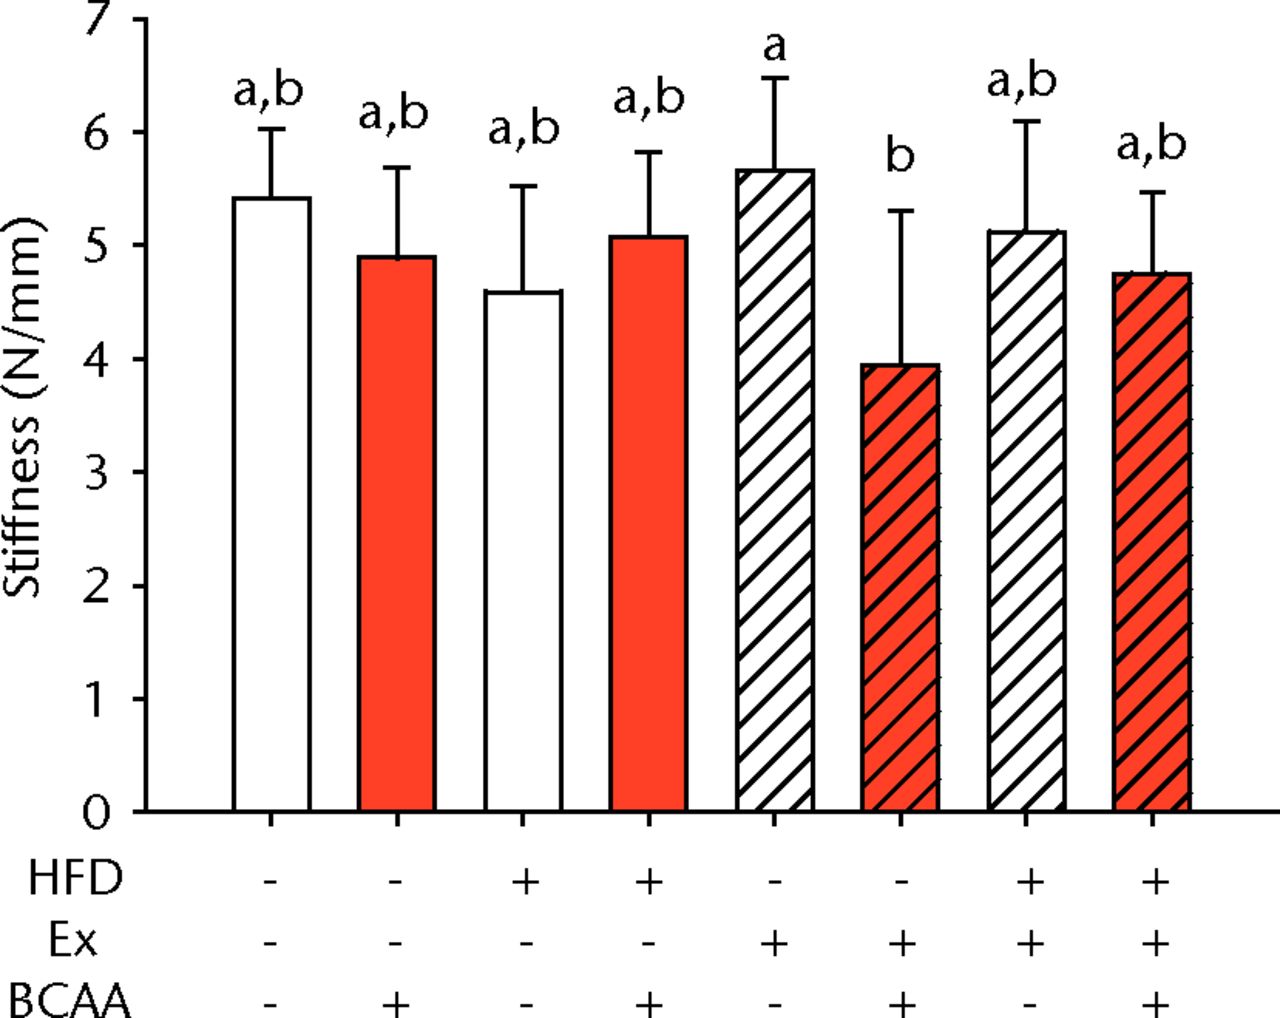 Figs. 2a - 2d 
            Bar charts of biomechanical
parameters, showing the mean a) tendon cross-section area, b) modulus,
c) maximum load and d) stiffness. Biomechanical parameters with
significant changes. For tendon cross-section (a), groups not sharing
a letter (‘a’ or ‘b’) are significantly different, based on a significant
main effect for high fat diet (HFD) and no other significant main
effects or interactions. For modulus (b), groups not sharing a letter
(‘a’, ‘b’, ‘c’, ‘d’, ‘e’, or ‘f’) are significantly different, based
on post-hoc comparisons following a significant
three-way interaction between HFD, exercise (Ex), and branched-chain
amino acid (BCAA). For maximum load (c), groups not sharing a letter
(‘a’ or ‘b’) are significantly different, based on a significant
main effect for exercise and no other significant main effects or
interactions. For stiffness (d), groups not sharing a letter (‘a’
or ‘b’) are significantly different, based on post-hoc comparisons
following significant two-way interactions between HFD and BCAA
as well as between exercise and BCAA. Error bars indicate standard
deviation.
          